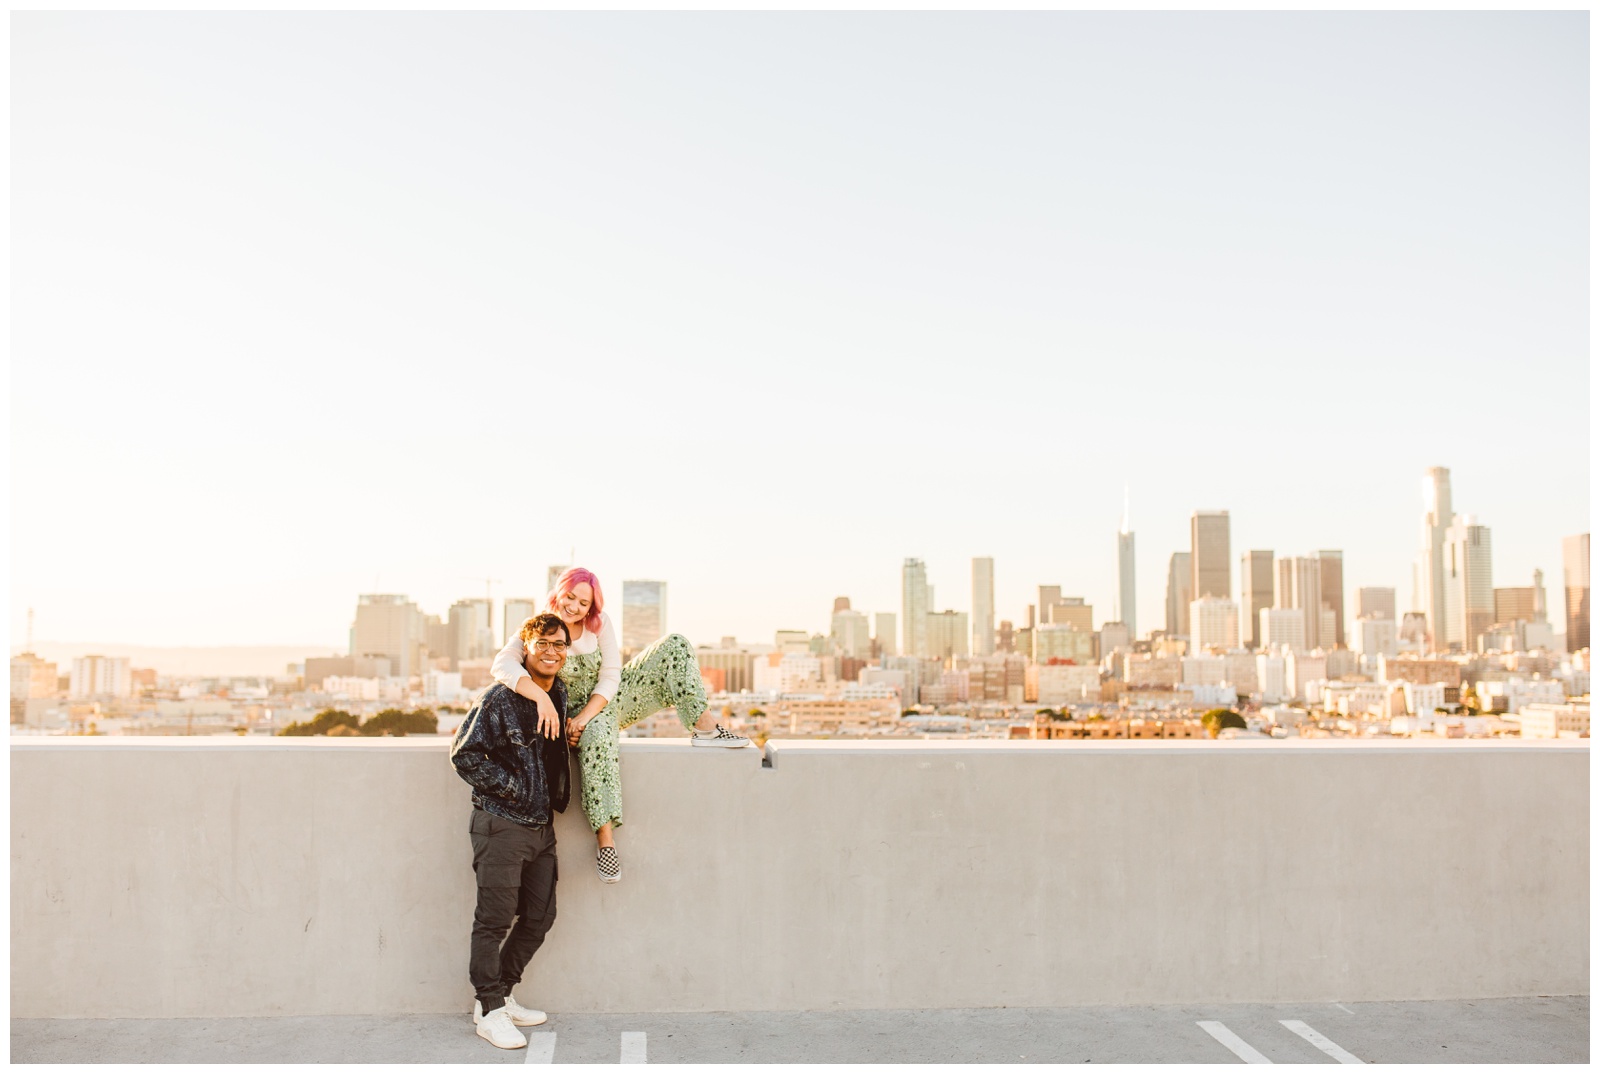 Downtown Los Angeles Rooftop Engagement Session - City Proposal Inspiration - Brooke Michelle Photo